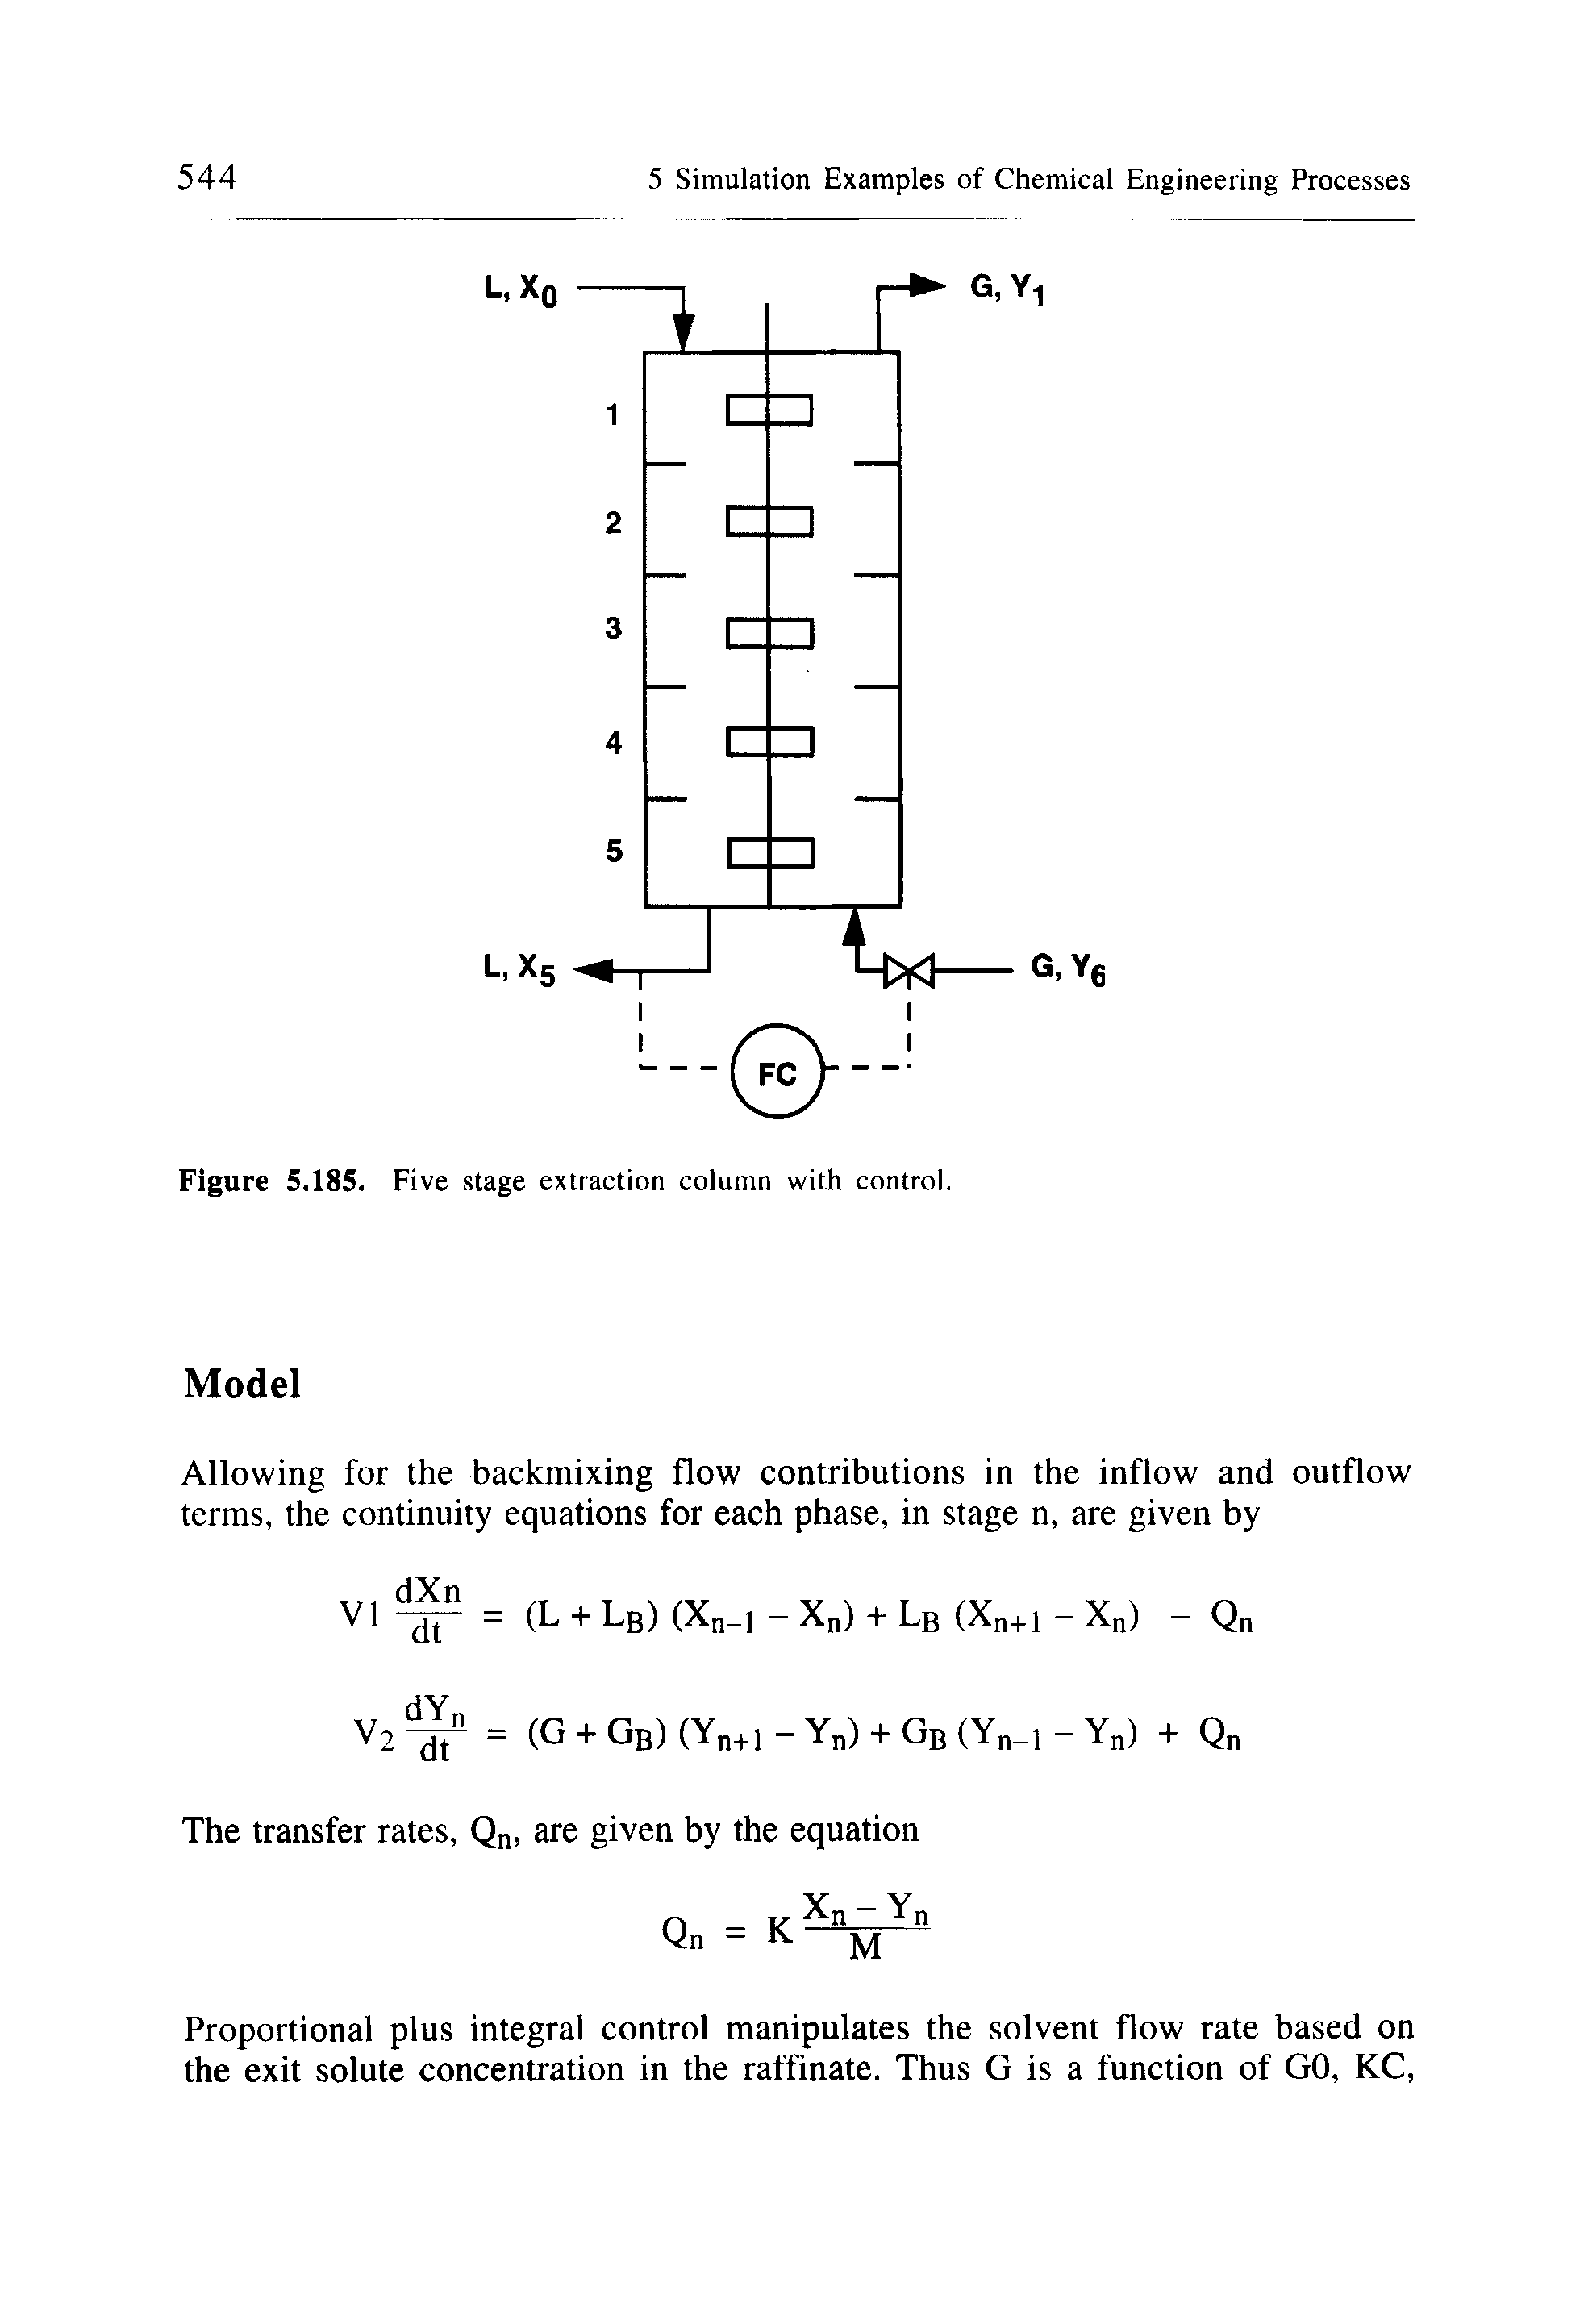 Figure 5.185. Five stage extraction column with control.